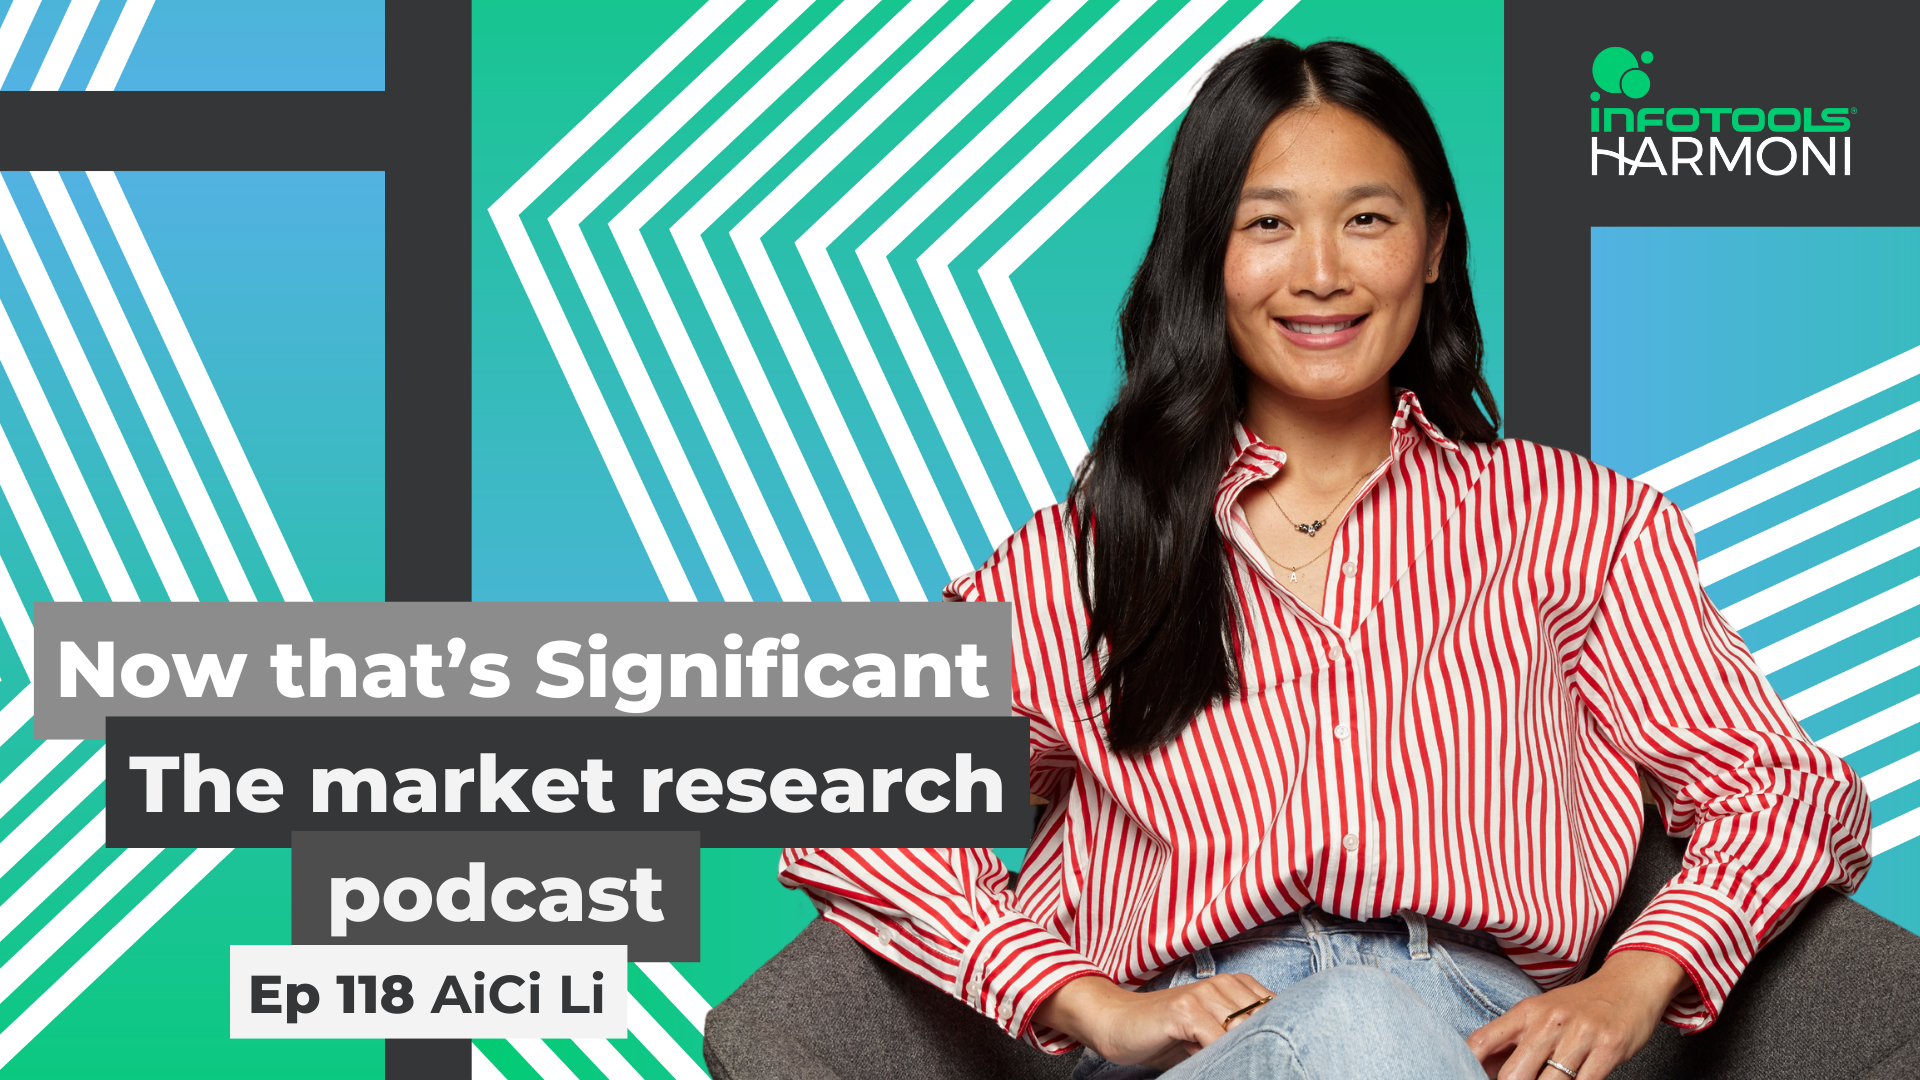 The journey toward achieving meaningful customer centricity in retail with AiCi Li